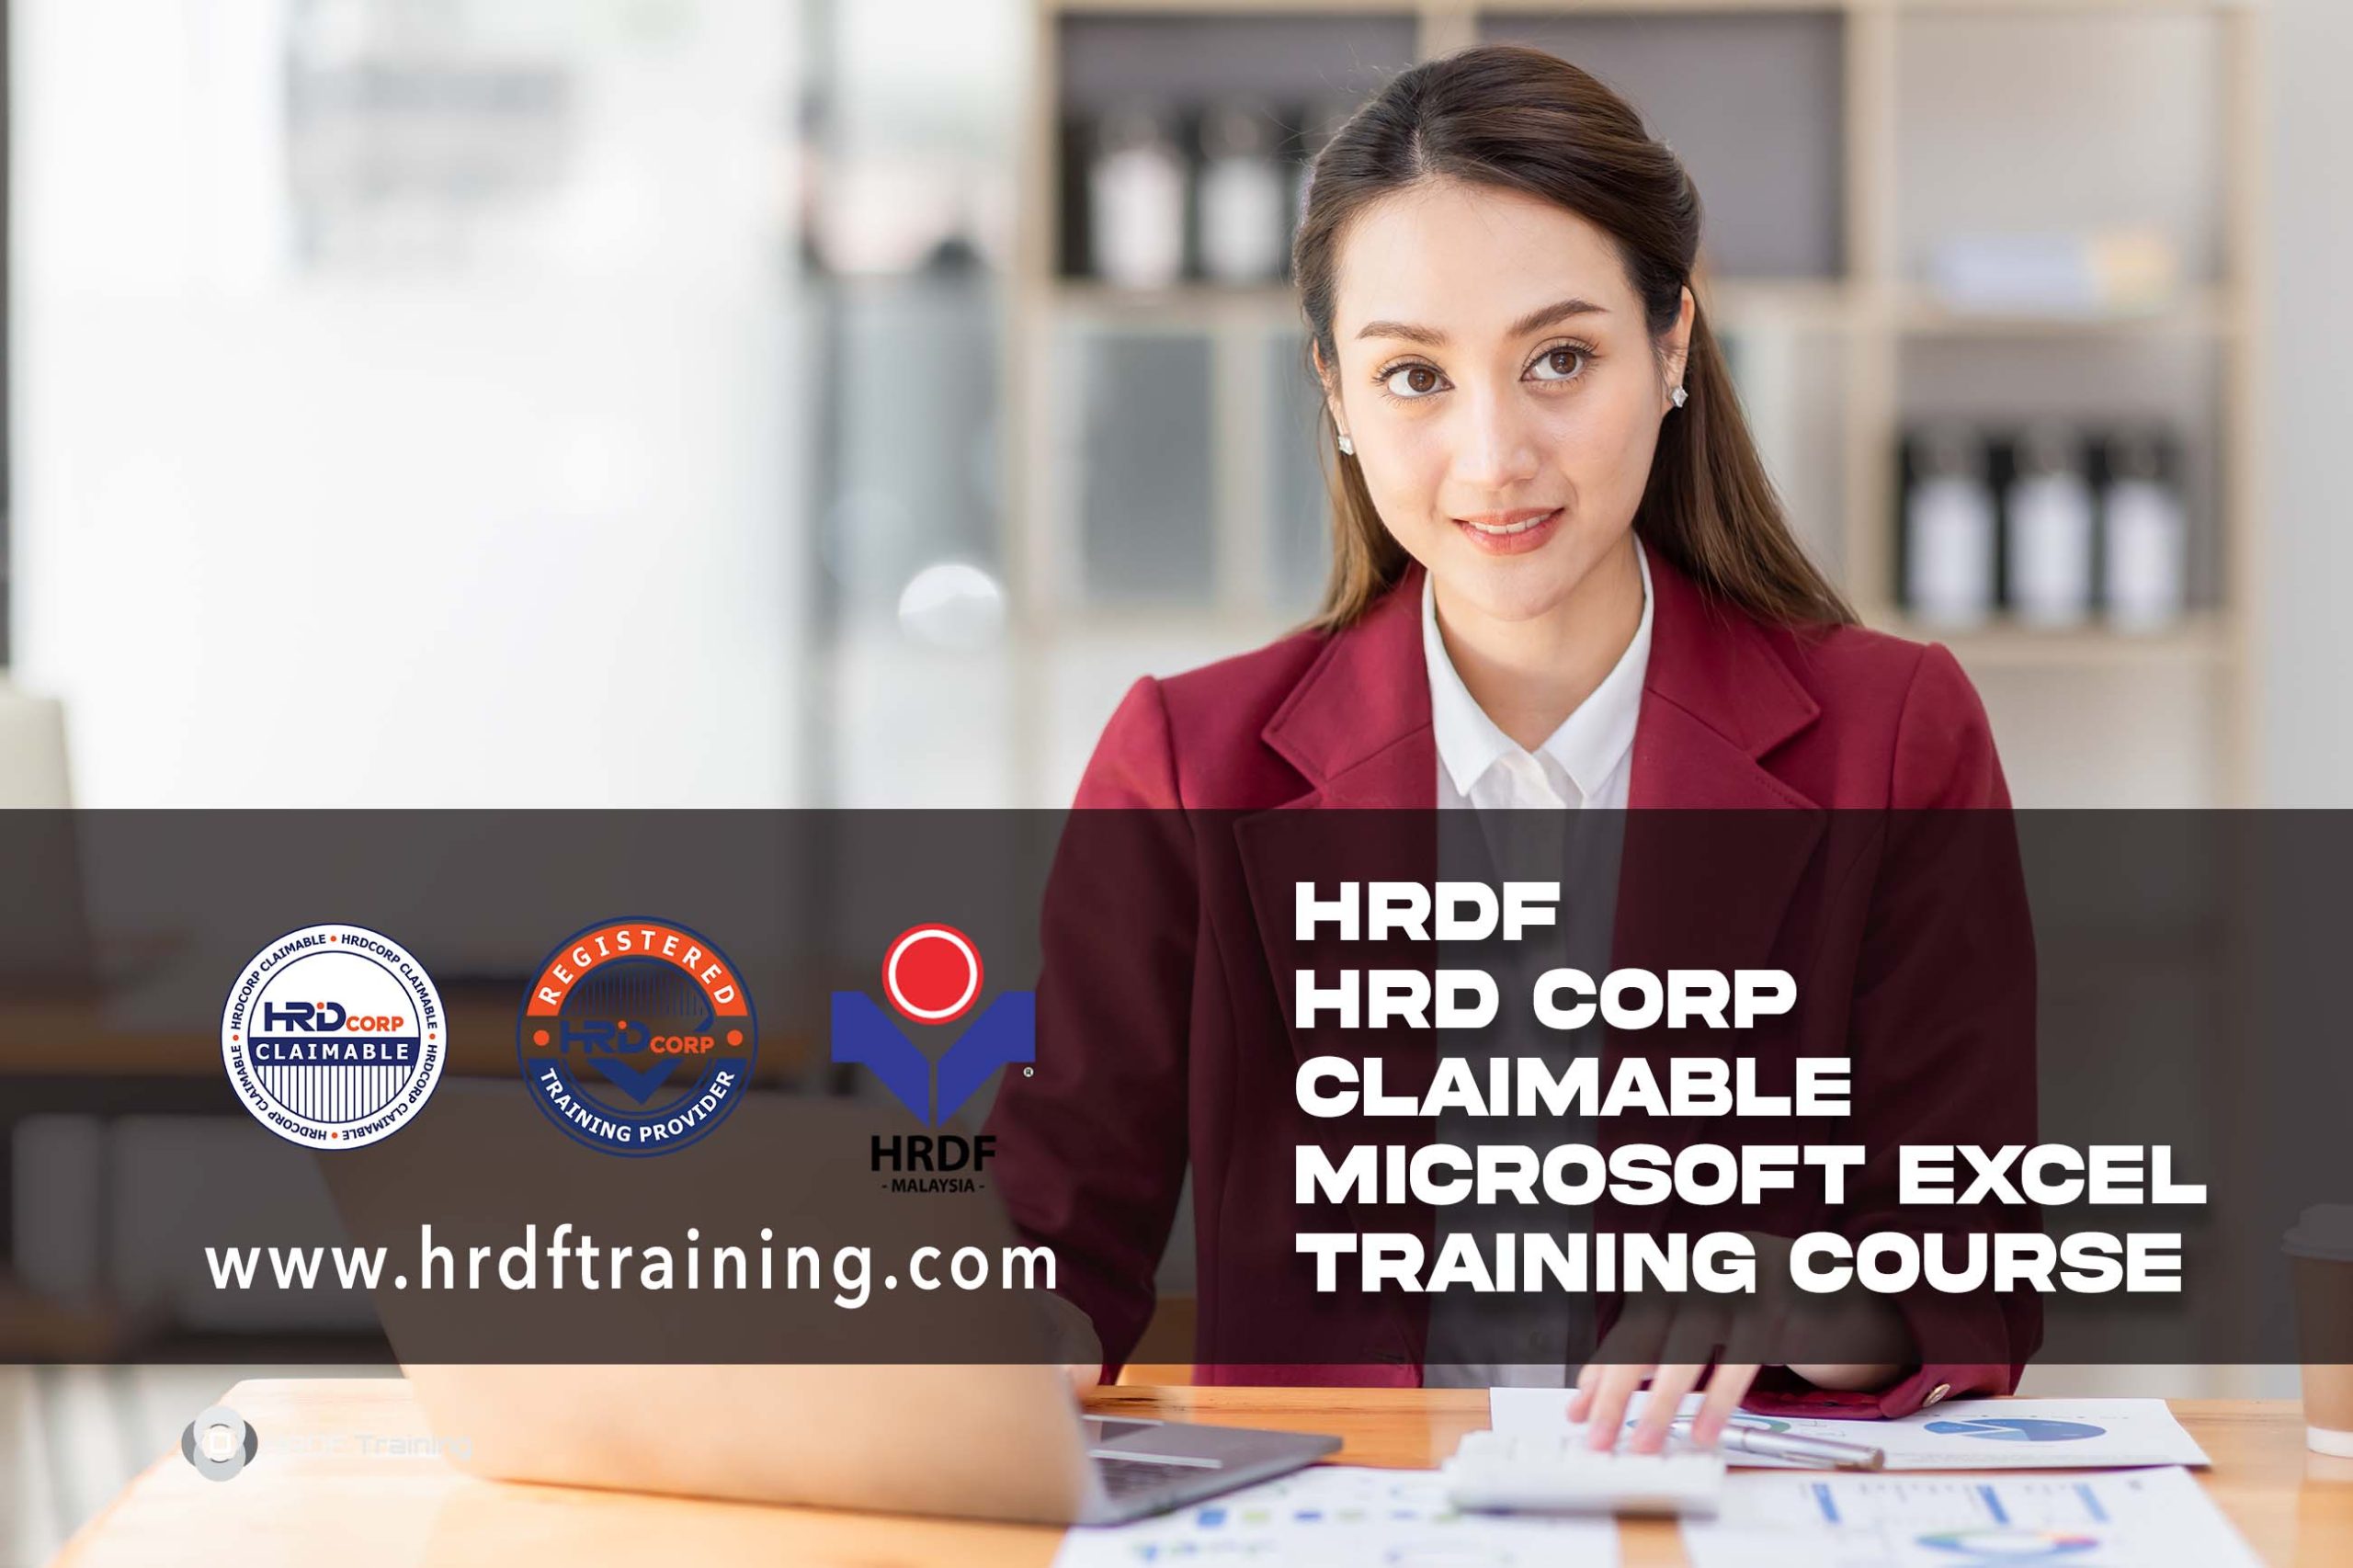 HRDF HRD CORP CLAIMABLE MICROSOFT EXCEL TRAINING COURSE